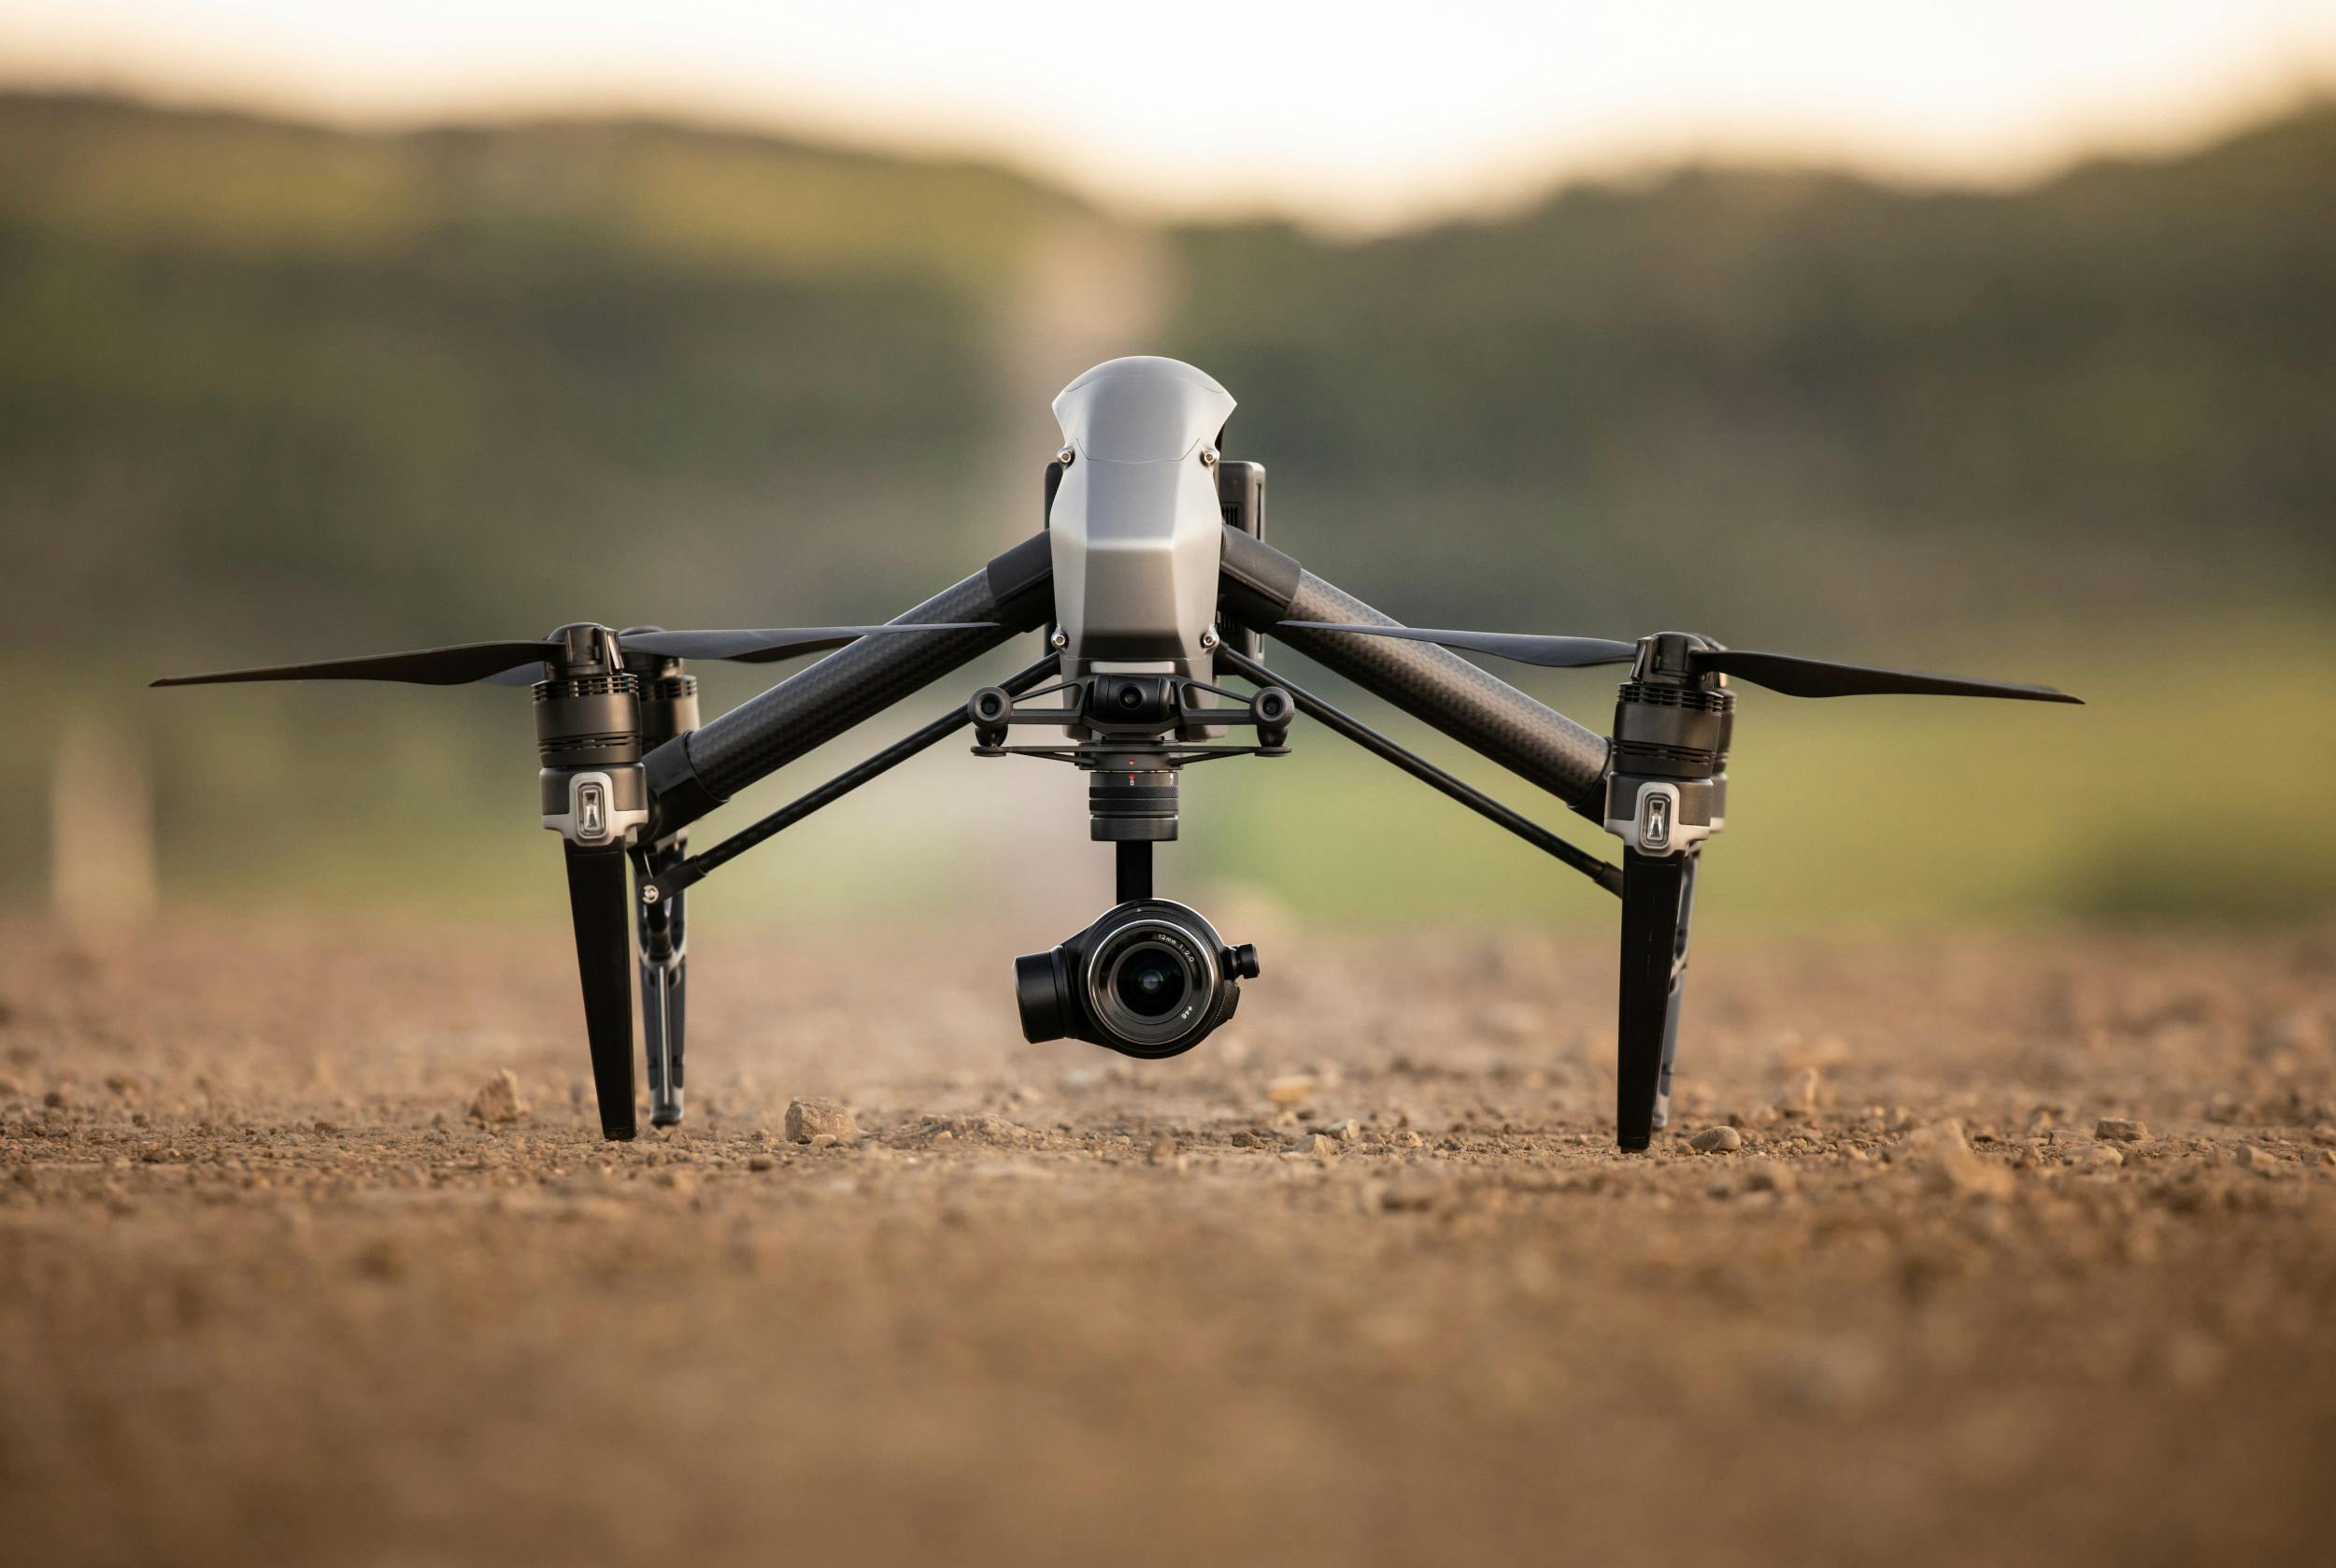 Confronting Drone Threats: Why New Technology Requires Action